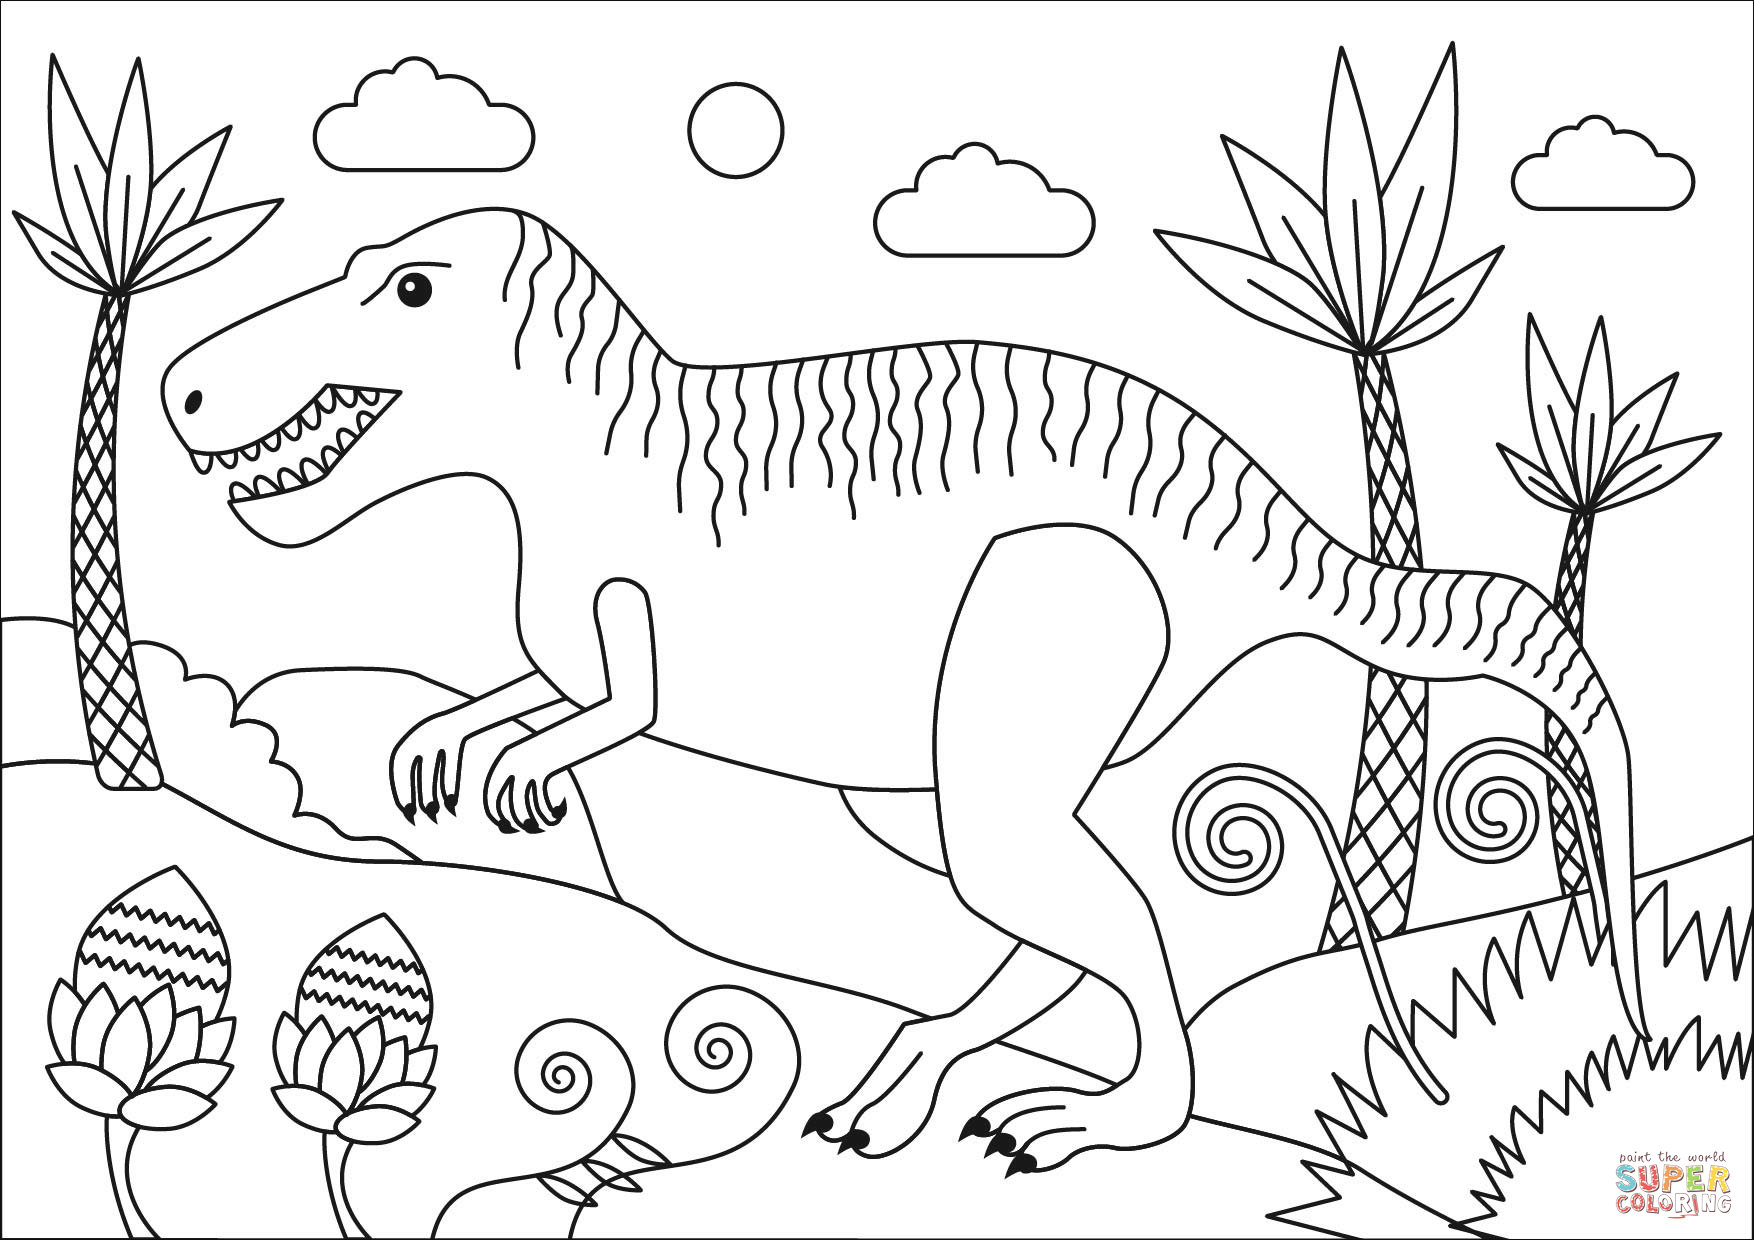 Tyrannosaurus coloring page | Free Printable Coloring Pages